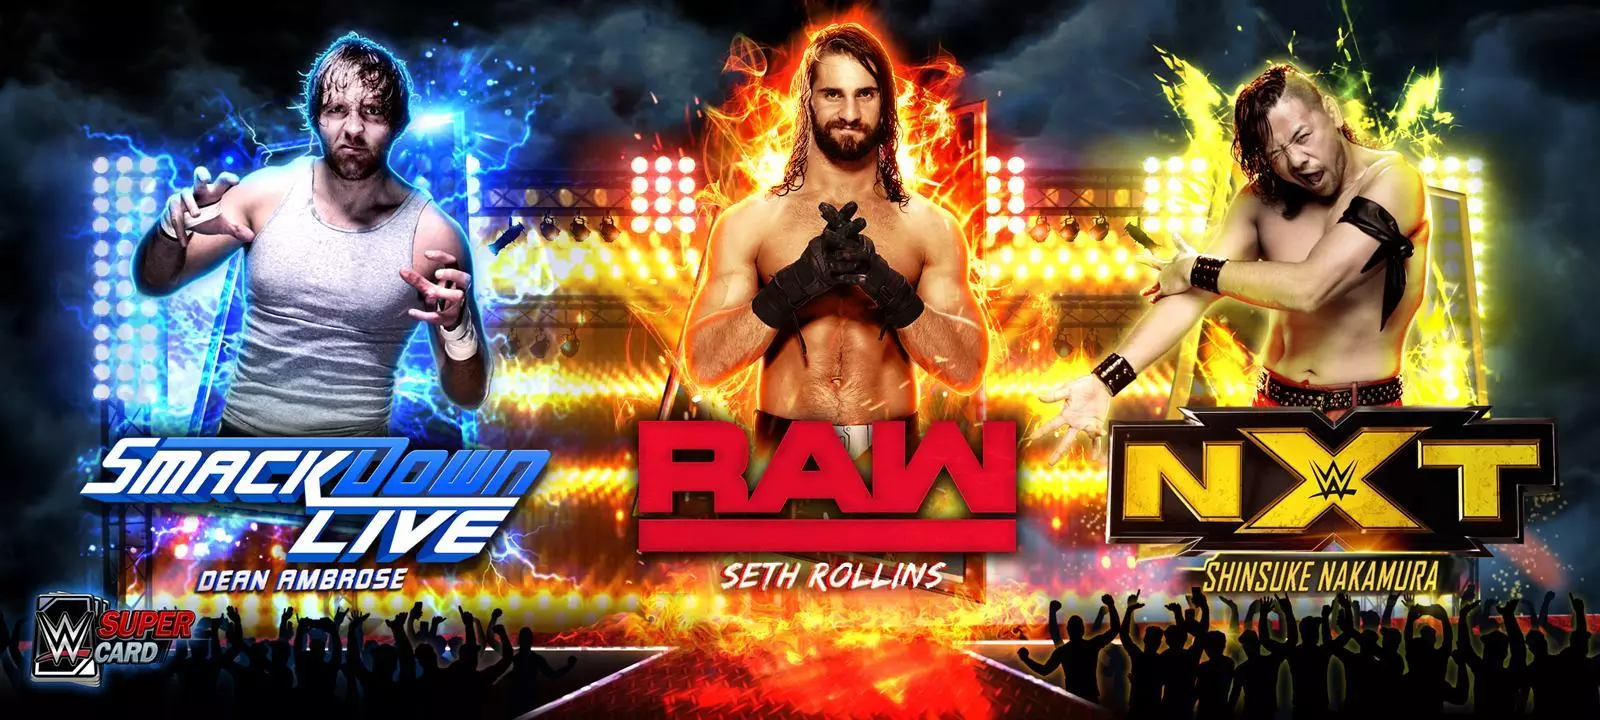 WWE SuperCard Season 3 features three new tiers with Raw, SmackDown and NXT cards